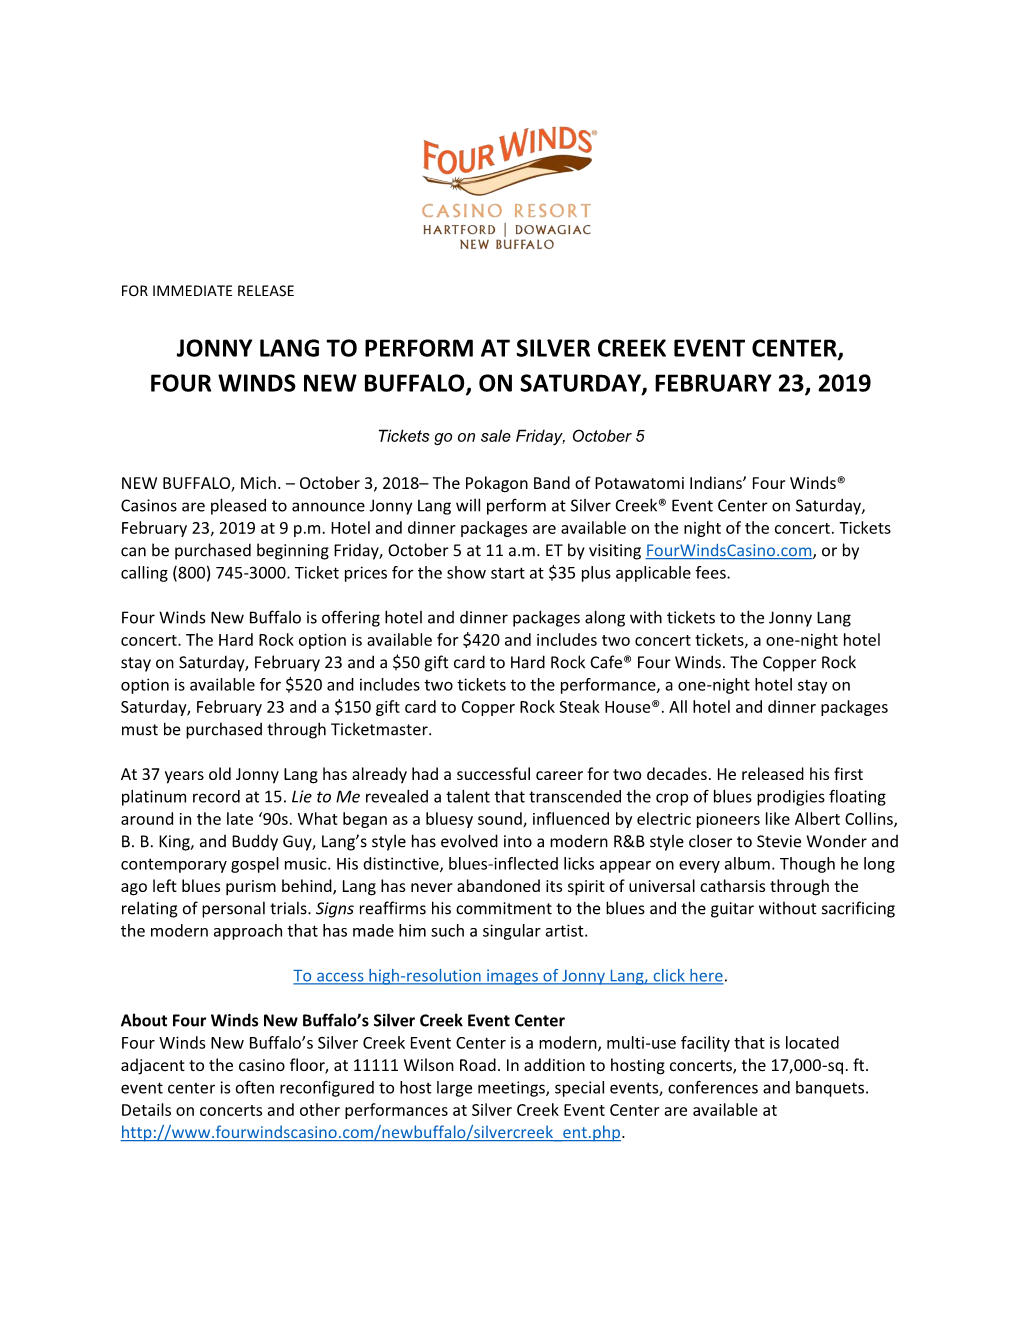 Jonny Lang to Perform at Silver Creek Event Center, Four Winds New Buffalo, on Saturday, February 23, 2019